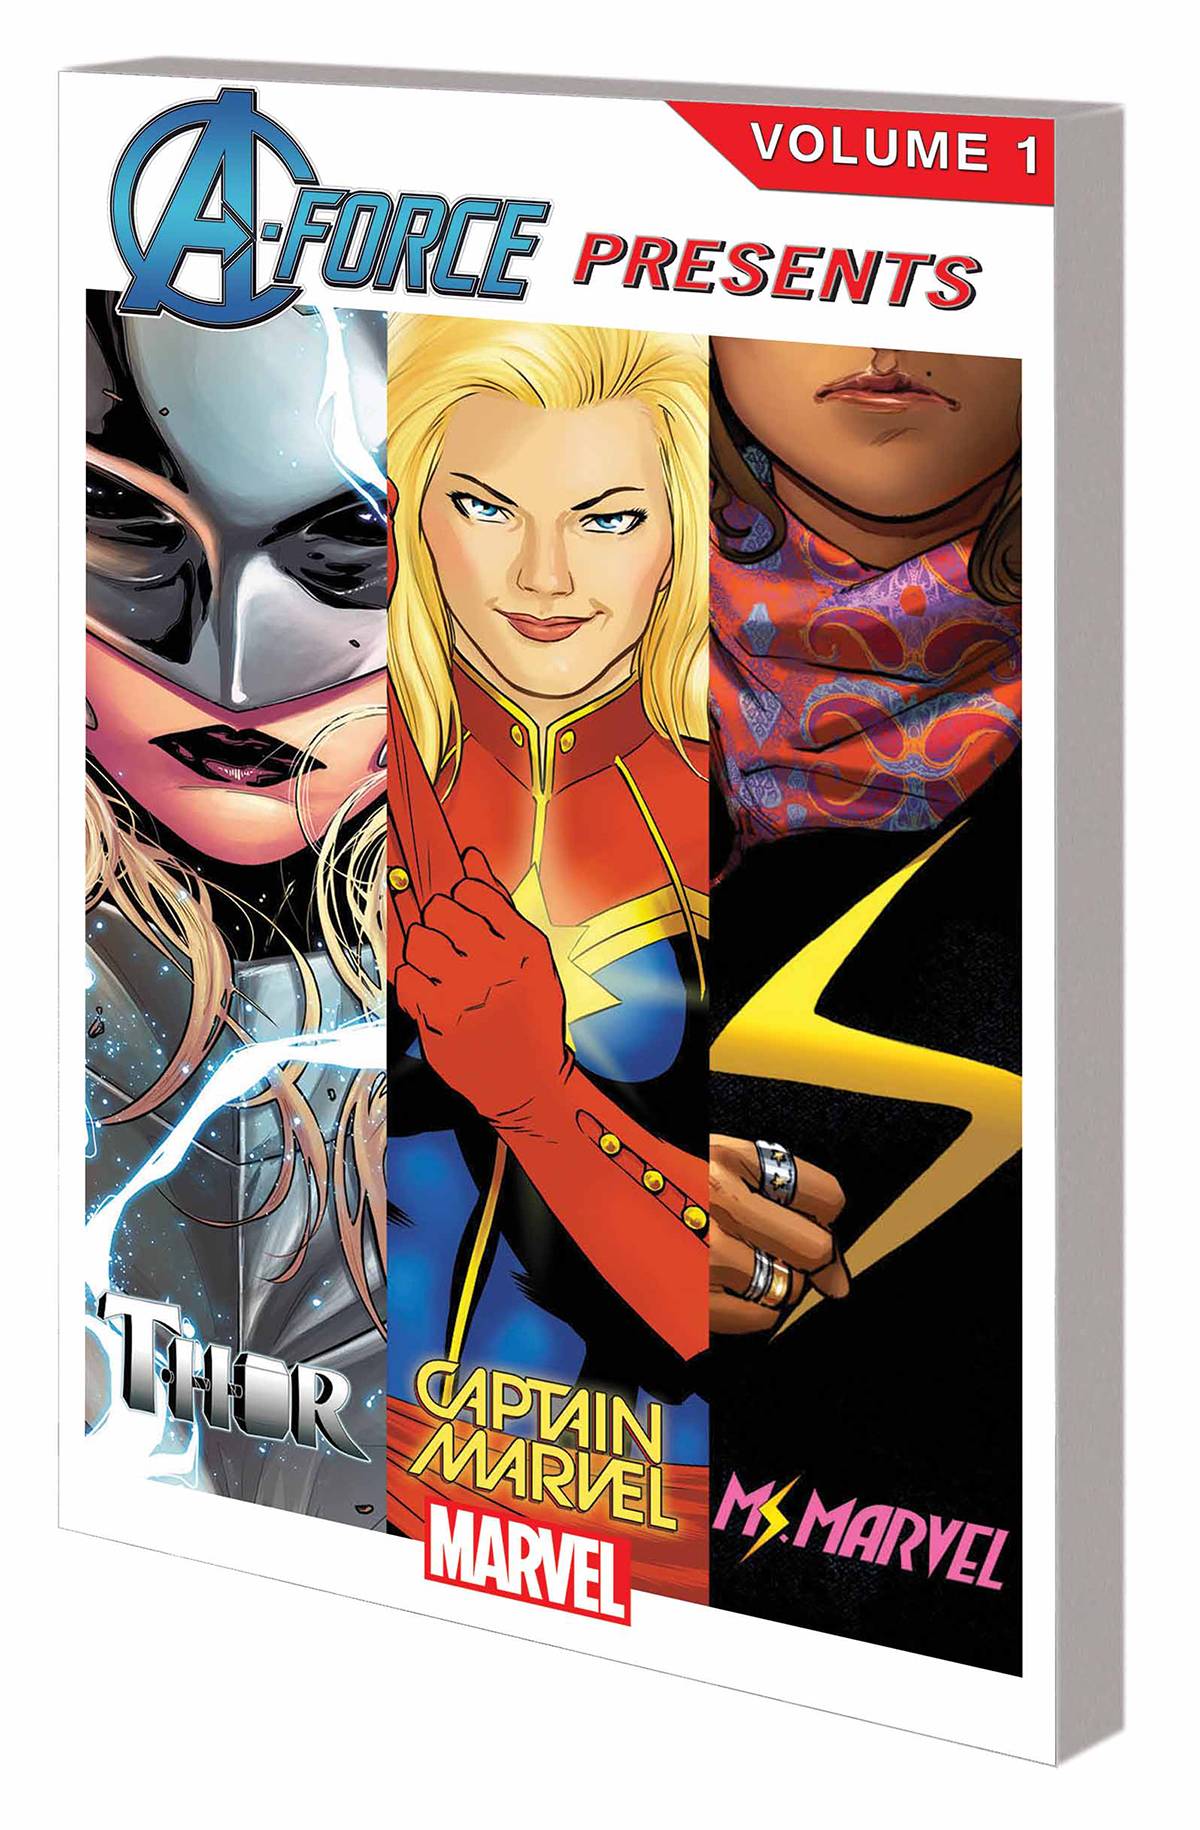 A-Force Presents Graphic Novel Volume 1